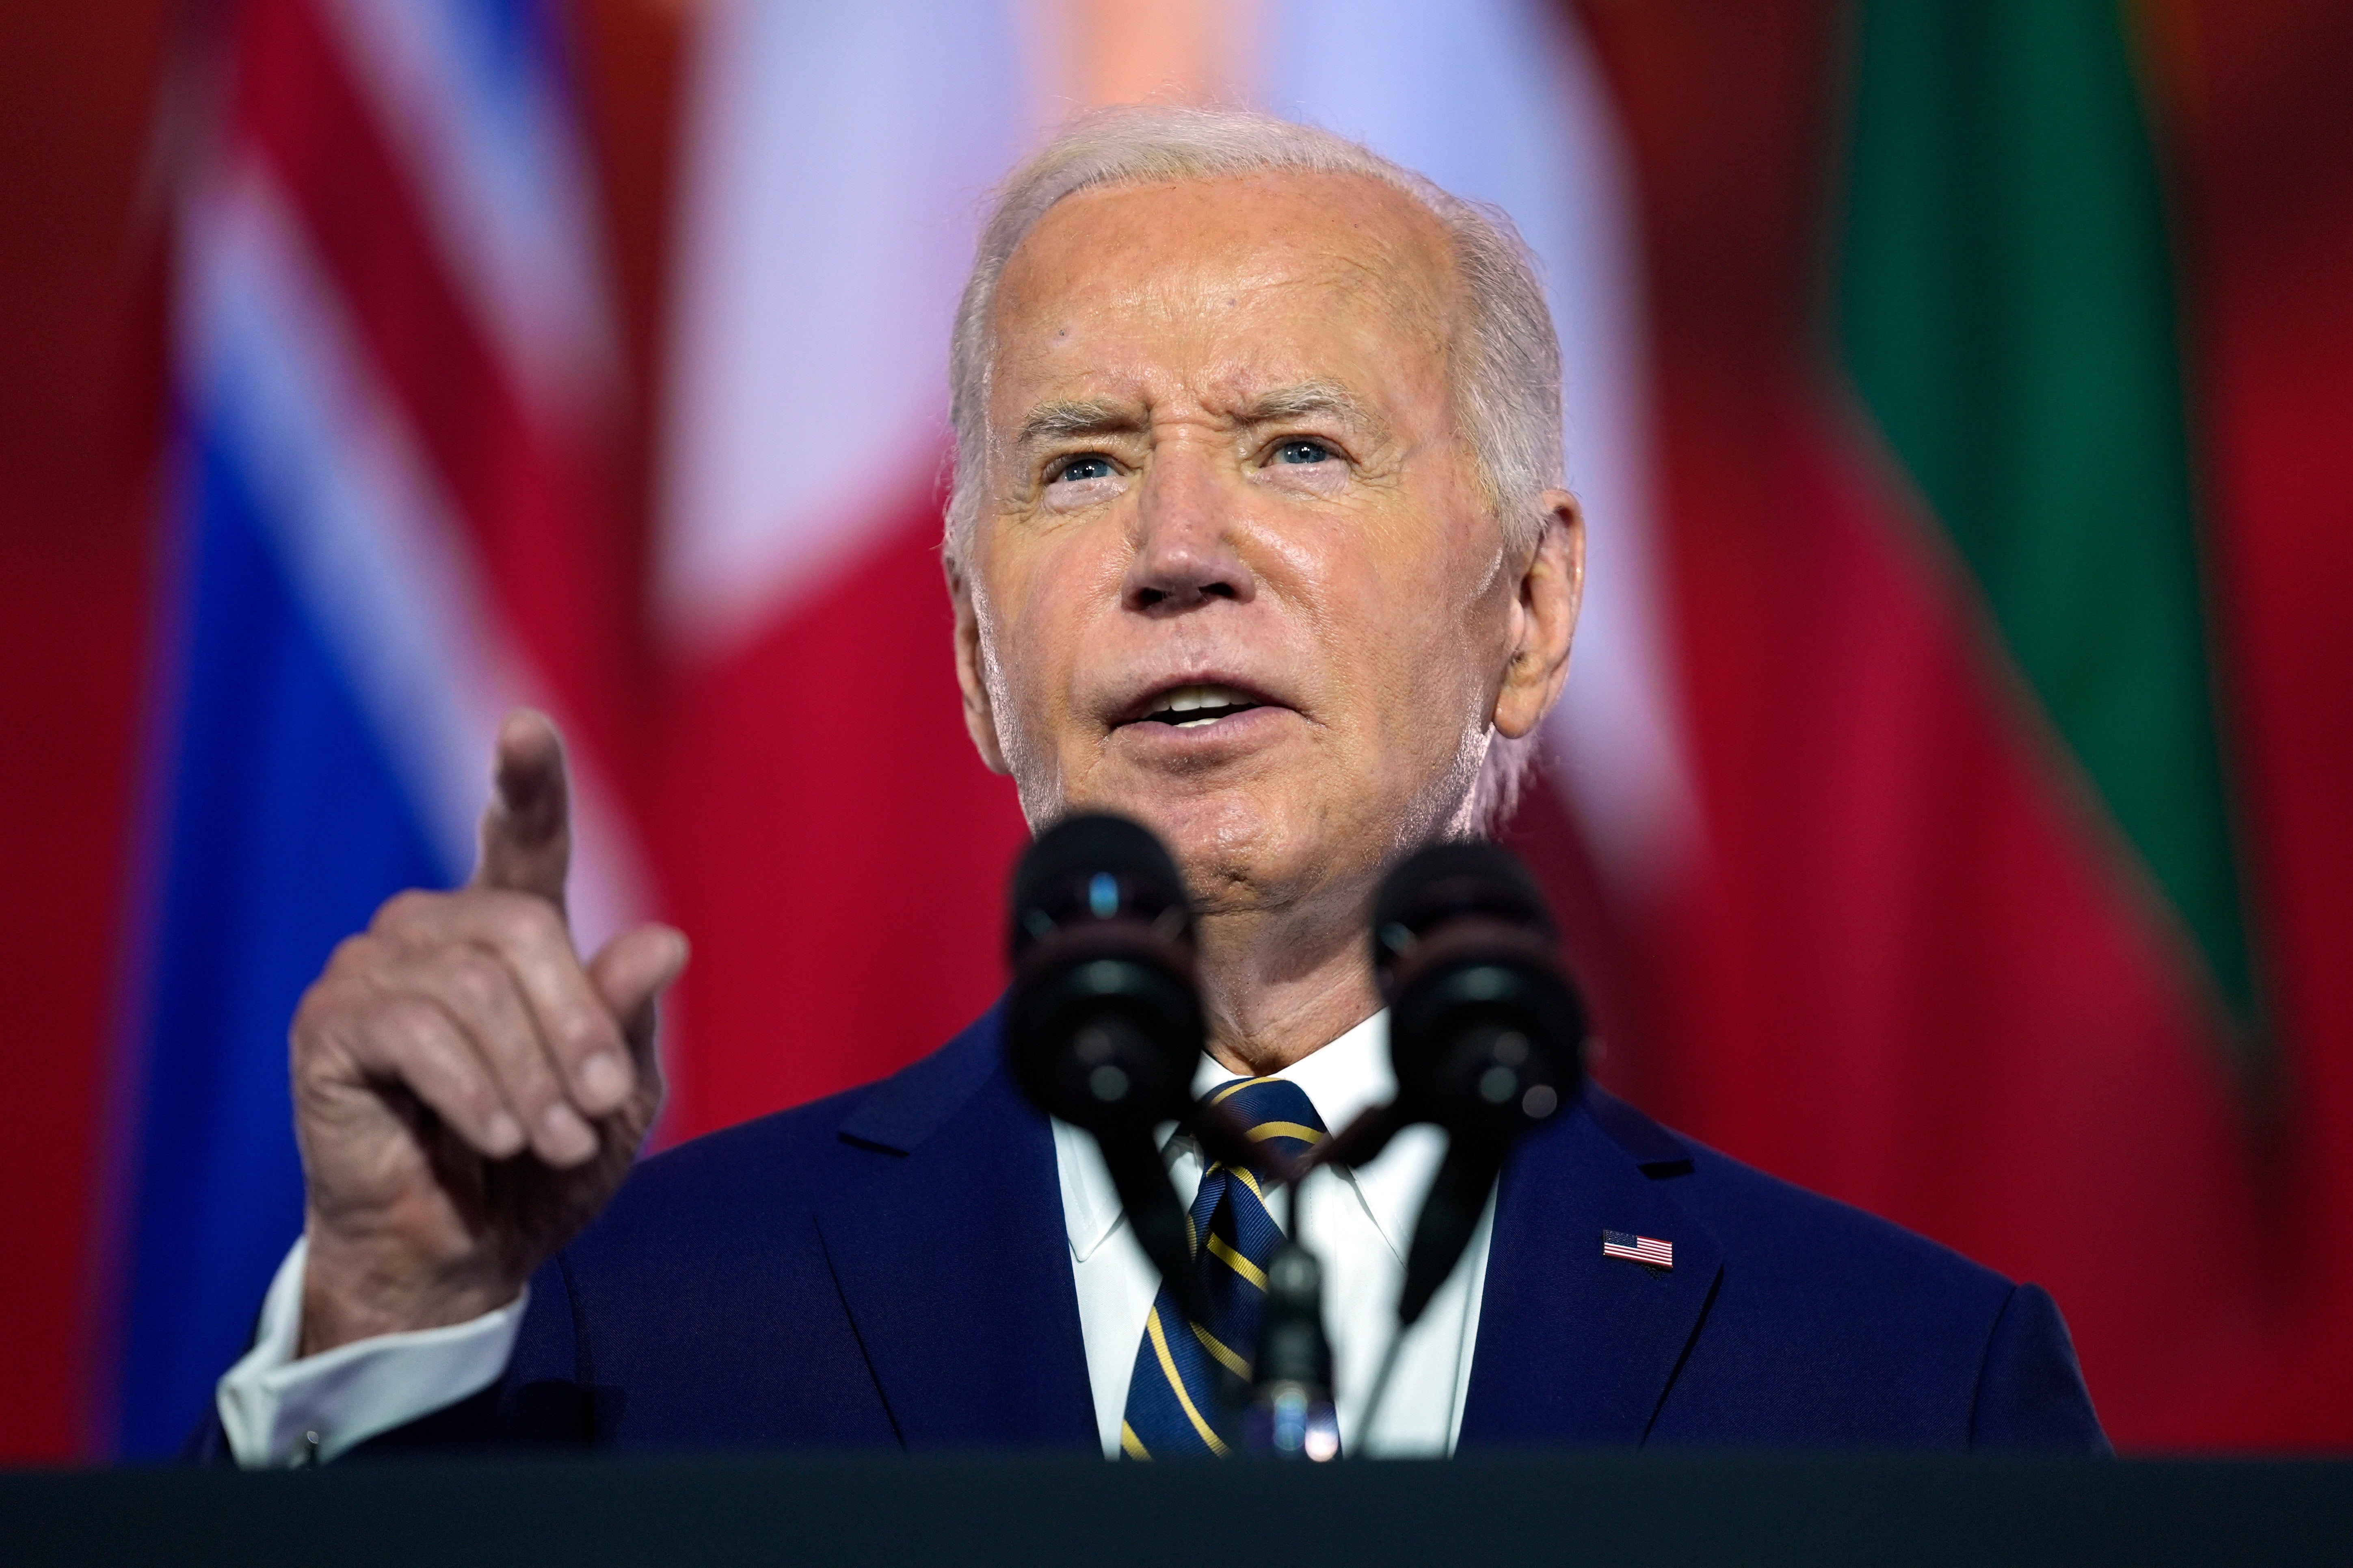 Biden has vowed to stay in the 2024 race